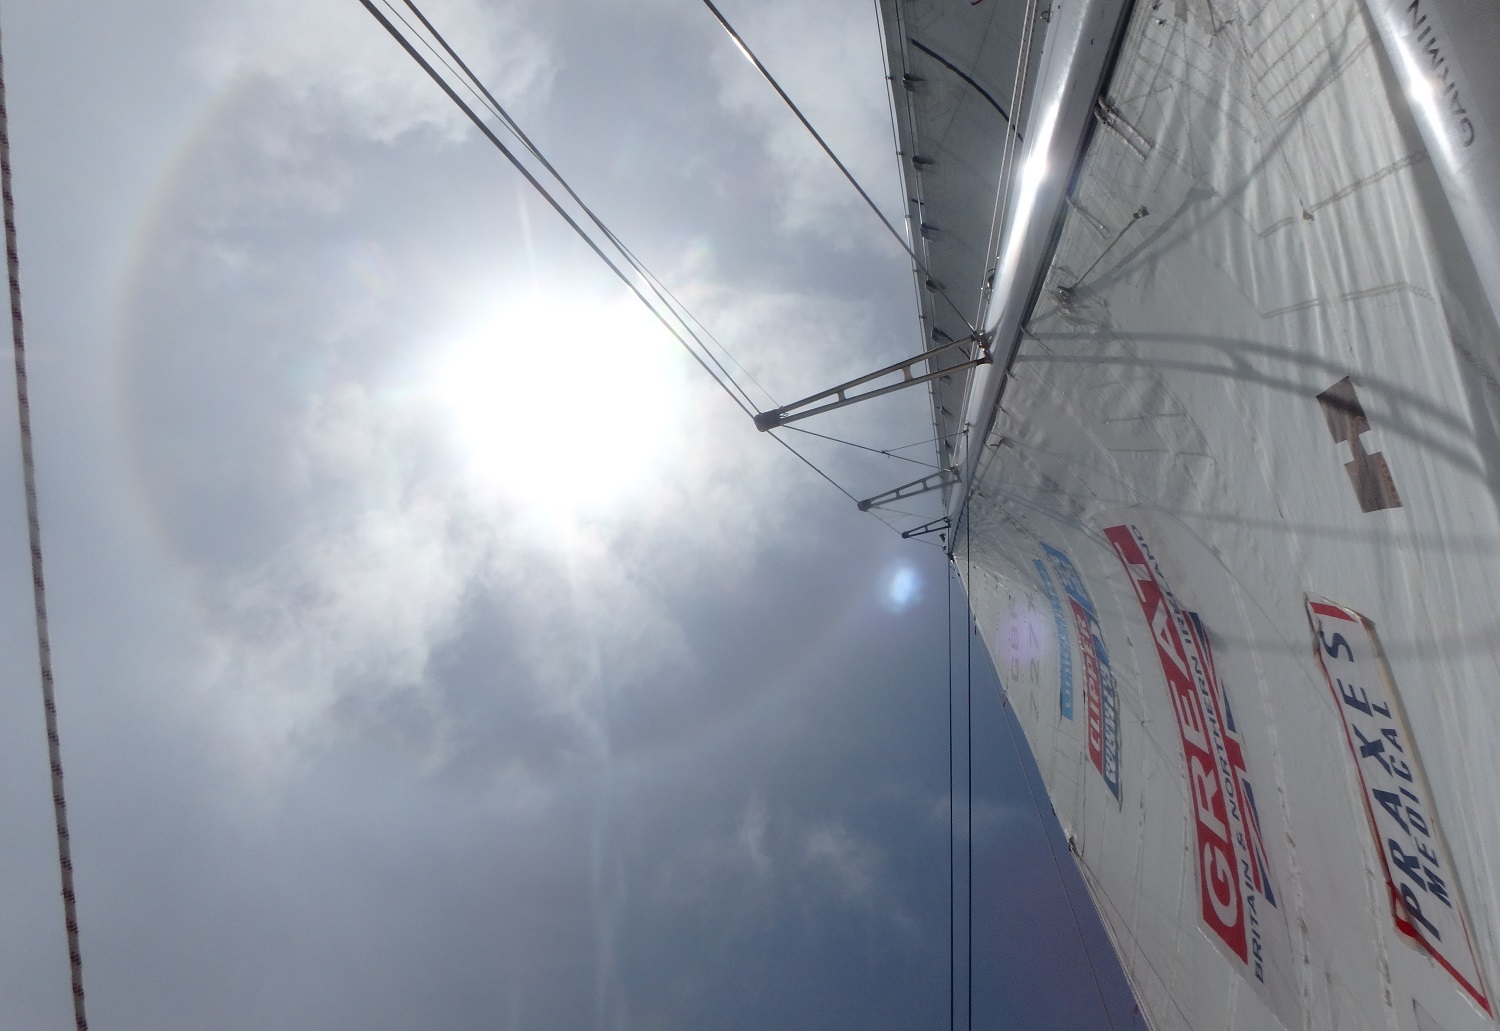 The sun shown shining strongly, looking upwards from GREAT Britain's mainsail